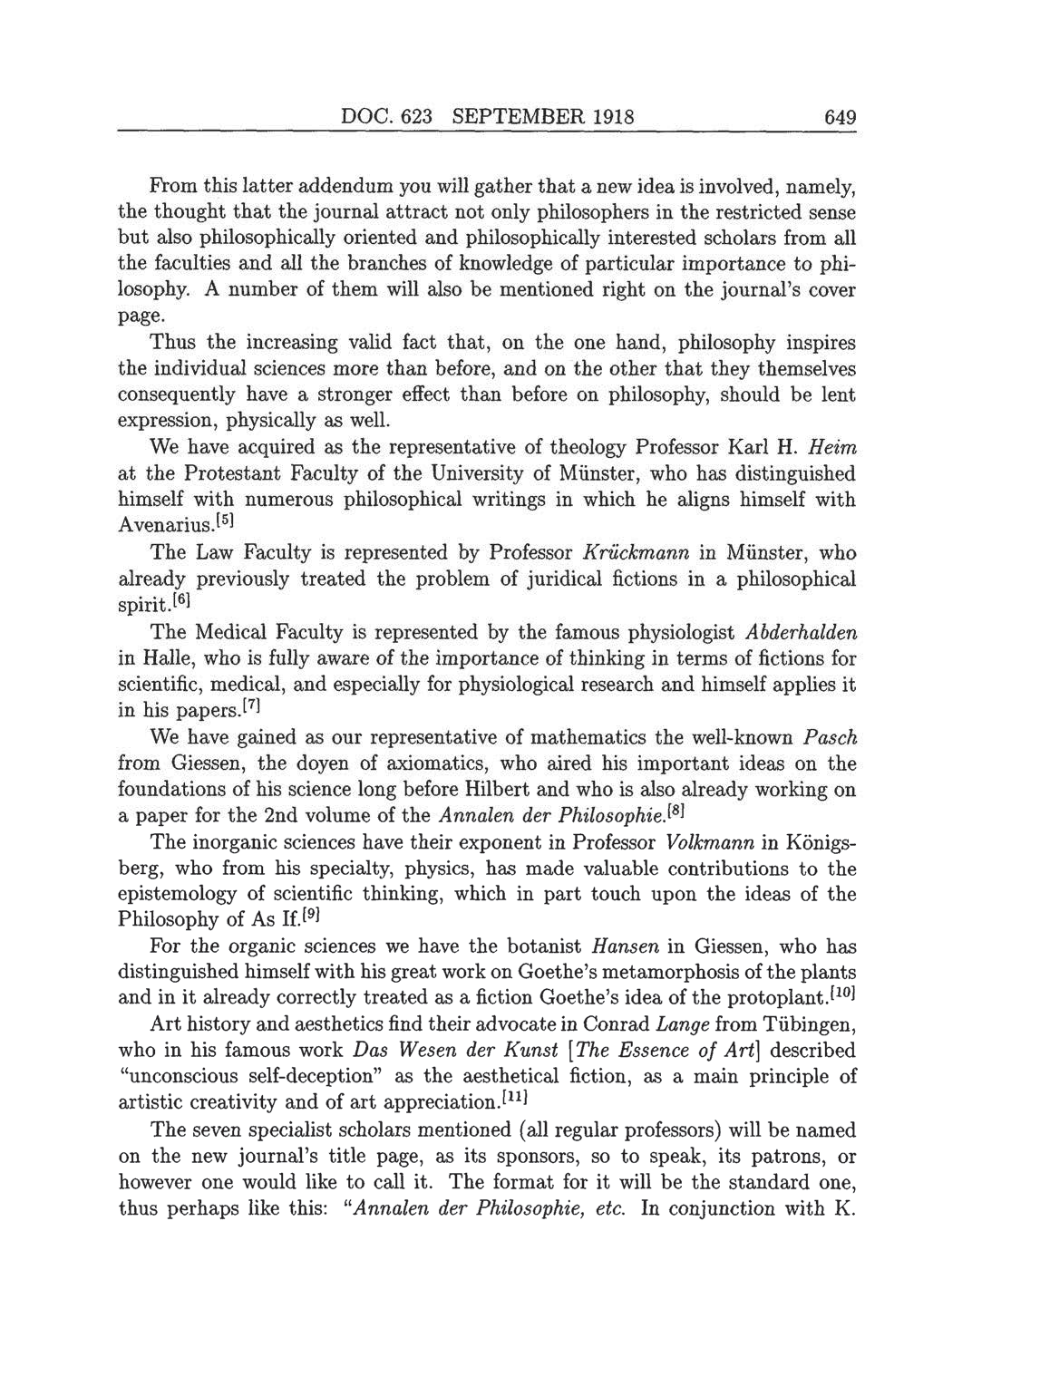 Volume 8: The Berlin Years: Correspondence, 1914-1918 (English translation supplement) page 649